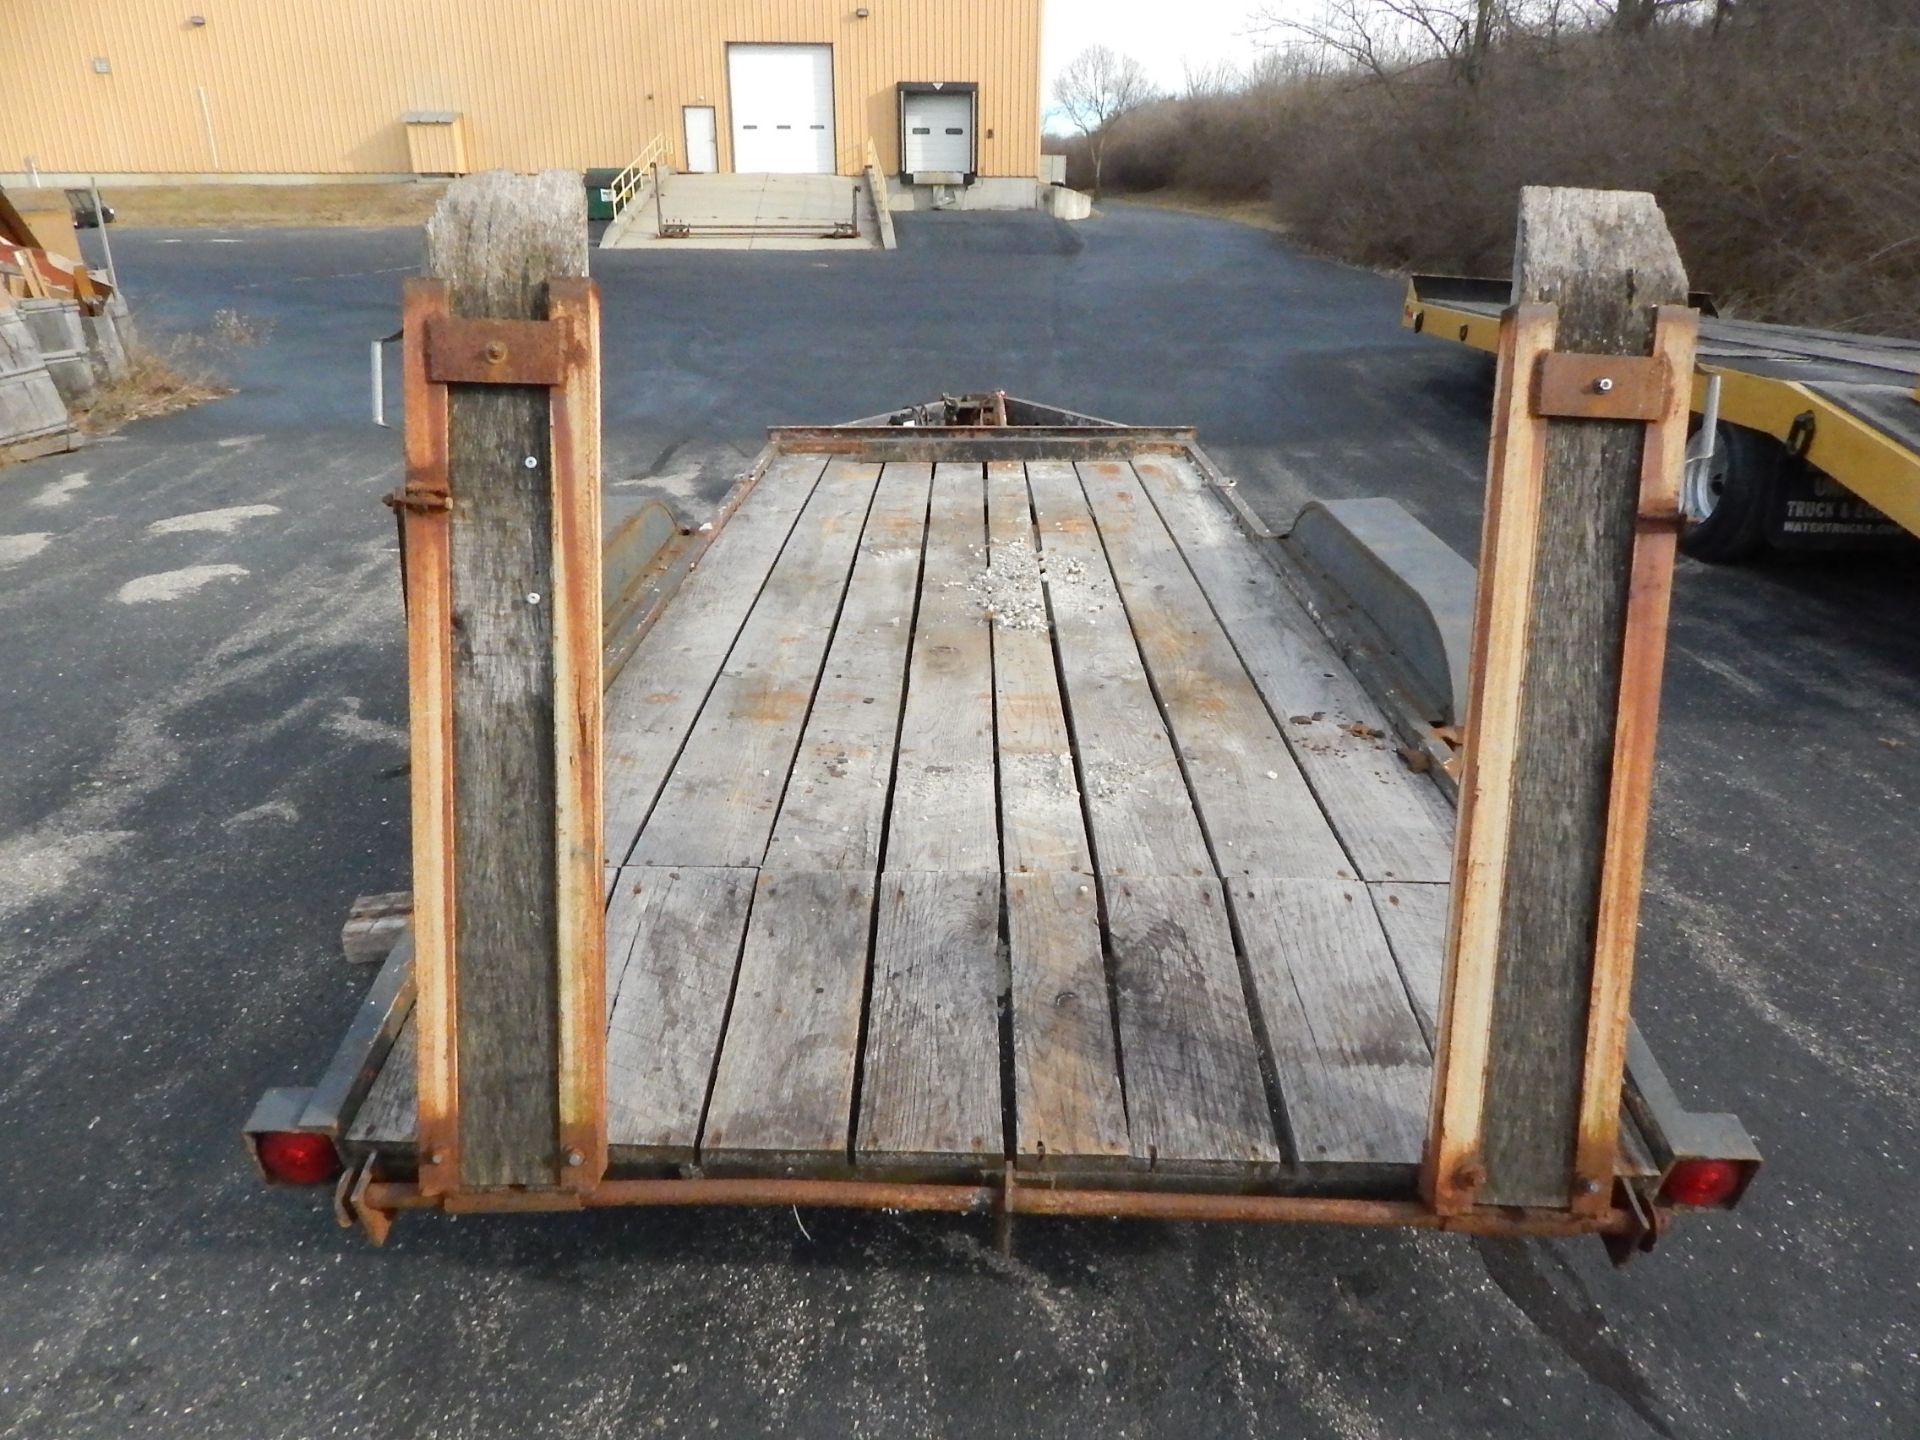 Tandem Axle Utility Trailer, 14 ft. Overall Length, 12 ft. Deck, 2 ft. Beavertail, Ramps, 72 in - Image 5 of 8